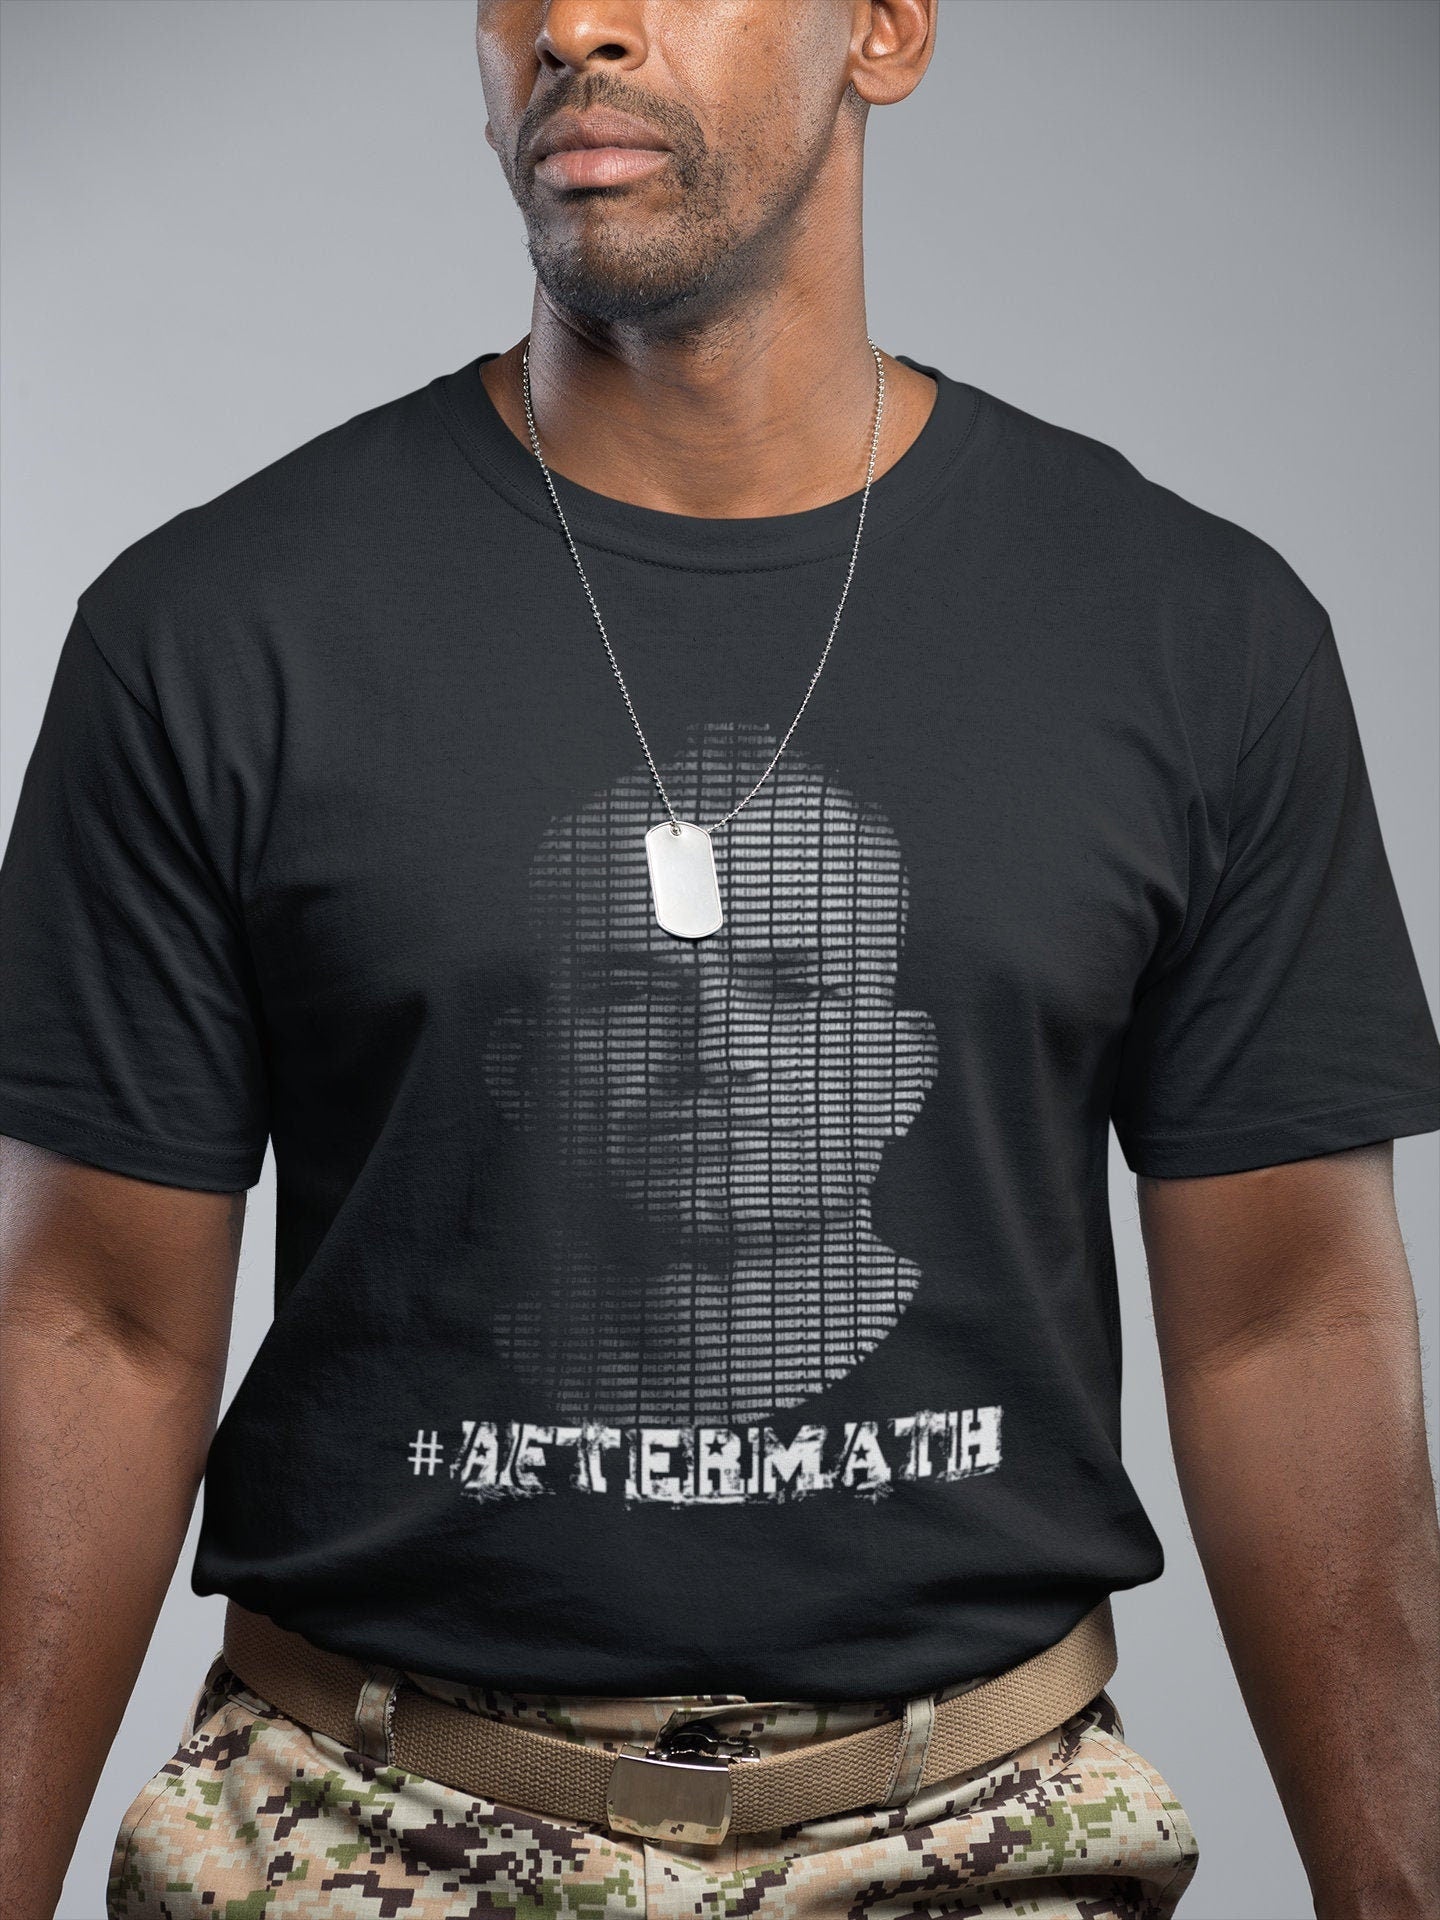 Discipline Equals Freedom Jocko Text Portrait #aftermath - Jocko Willink Inspired Navy Seal Army Graphic T Shirt